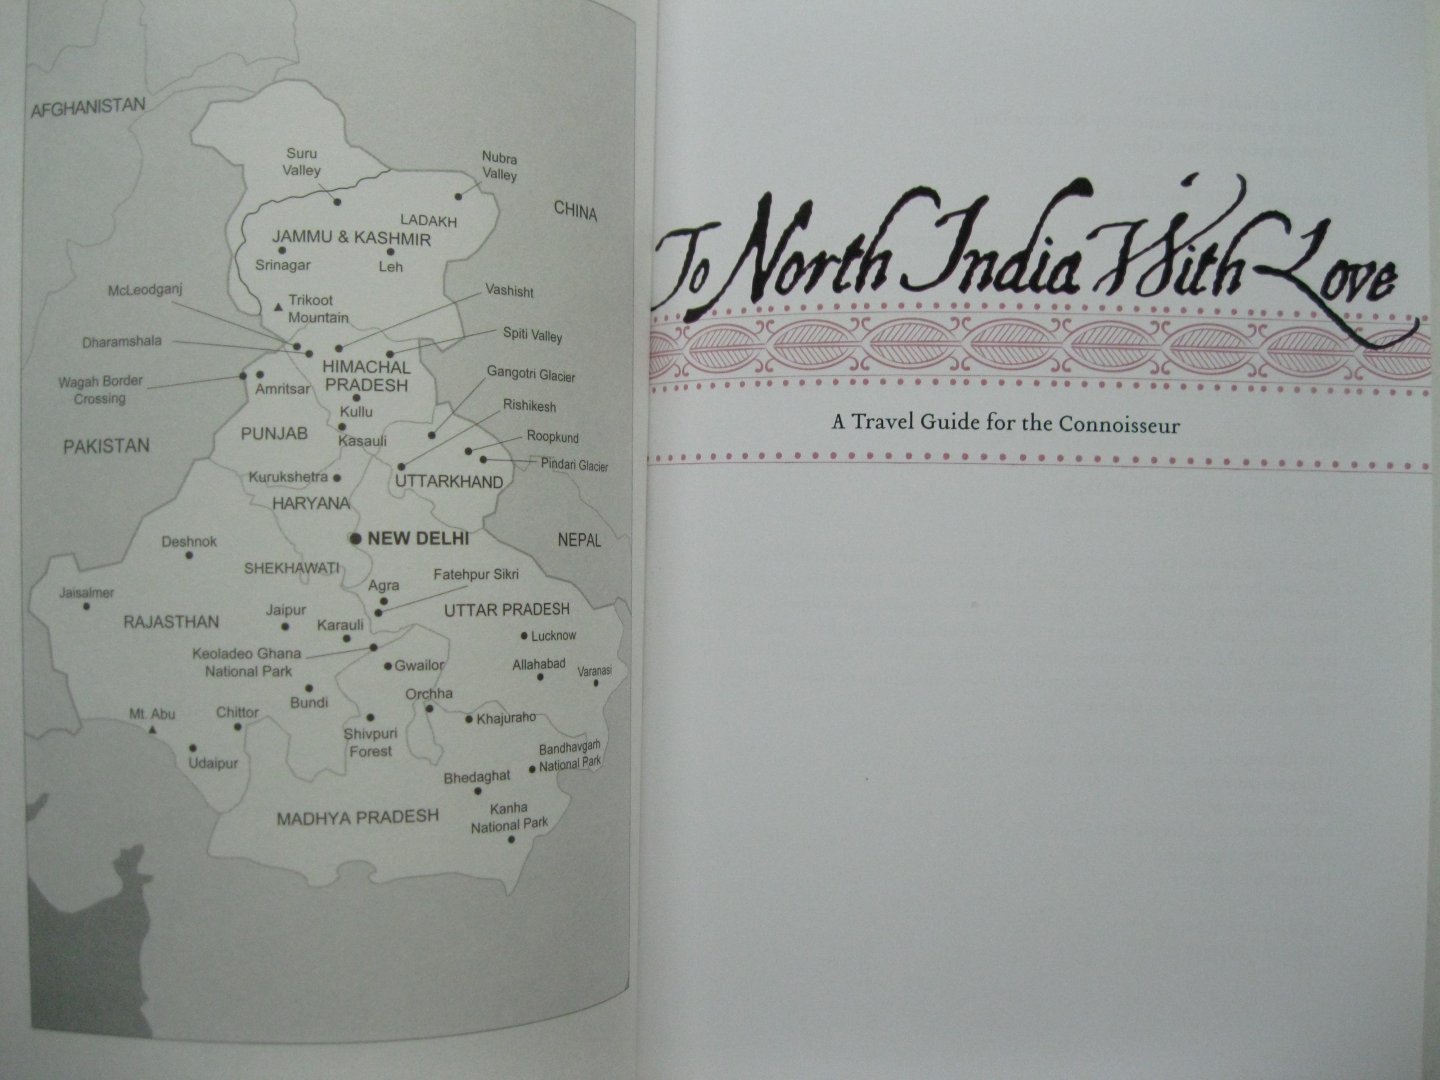 Nabanita Dutt - To North India with love. A travel guide for the conoisseur.